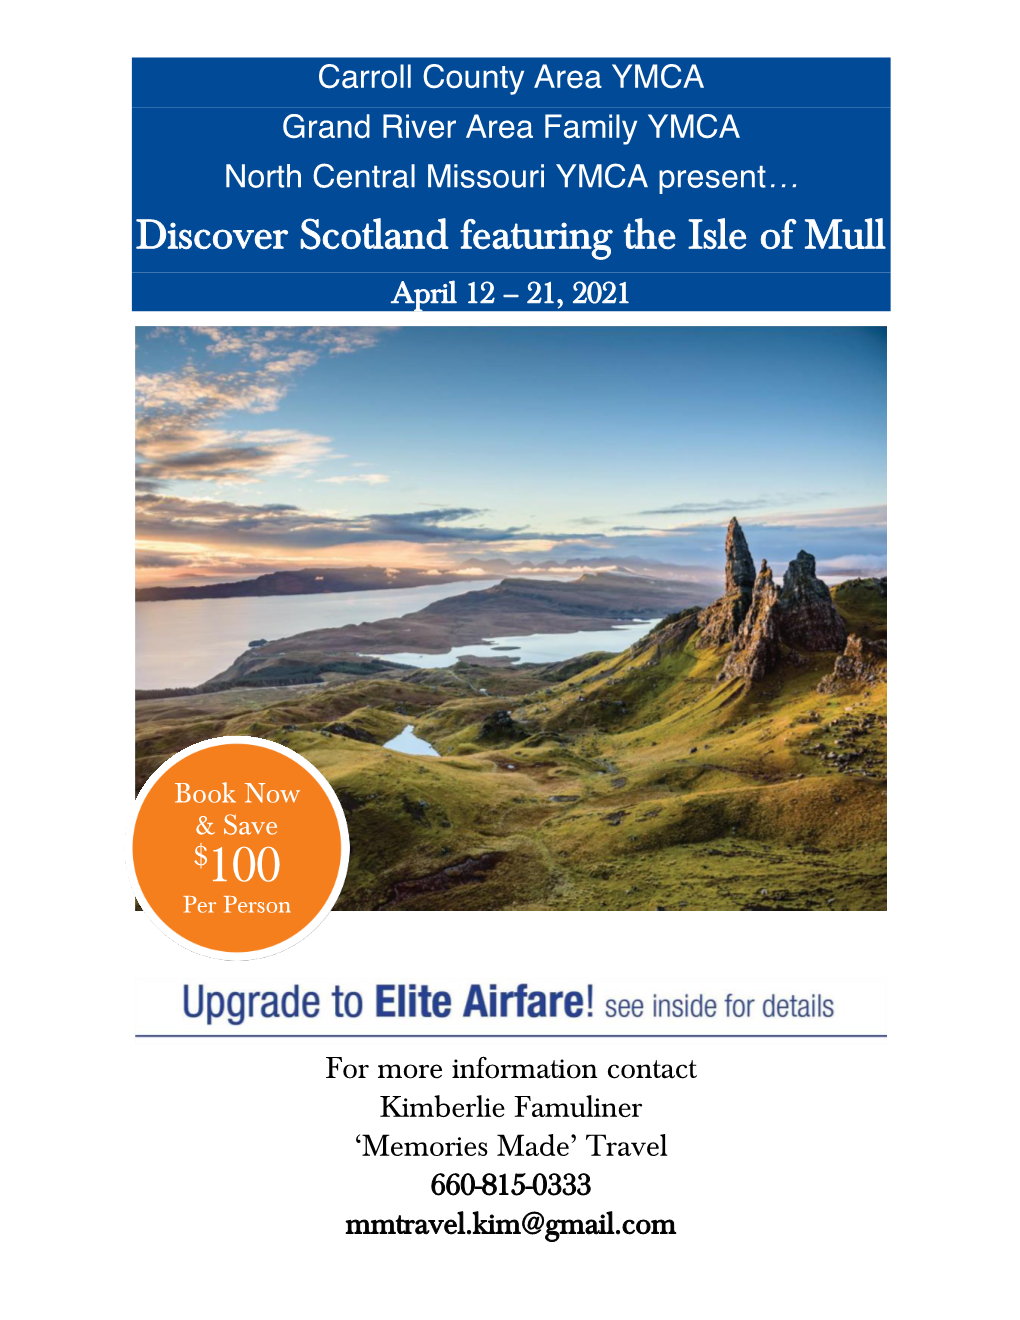 Discover Scotland Featuring the Isle of Mull